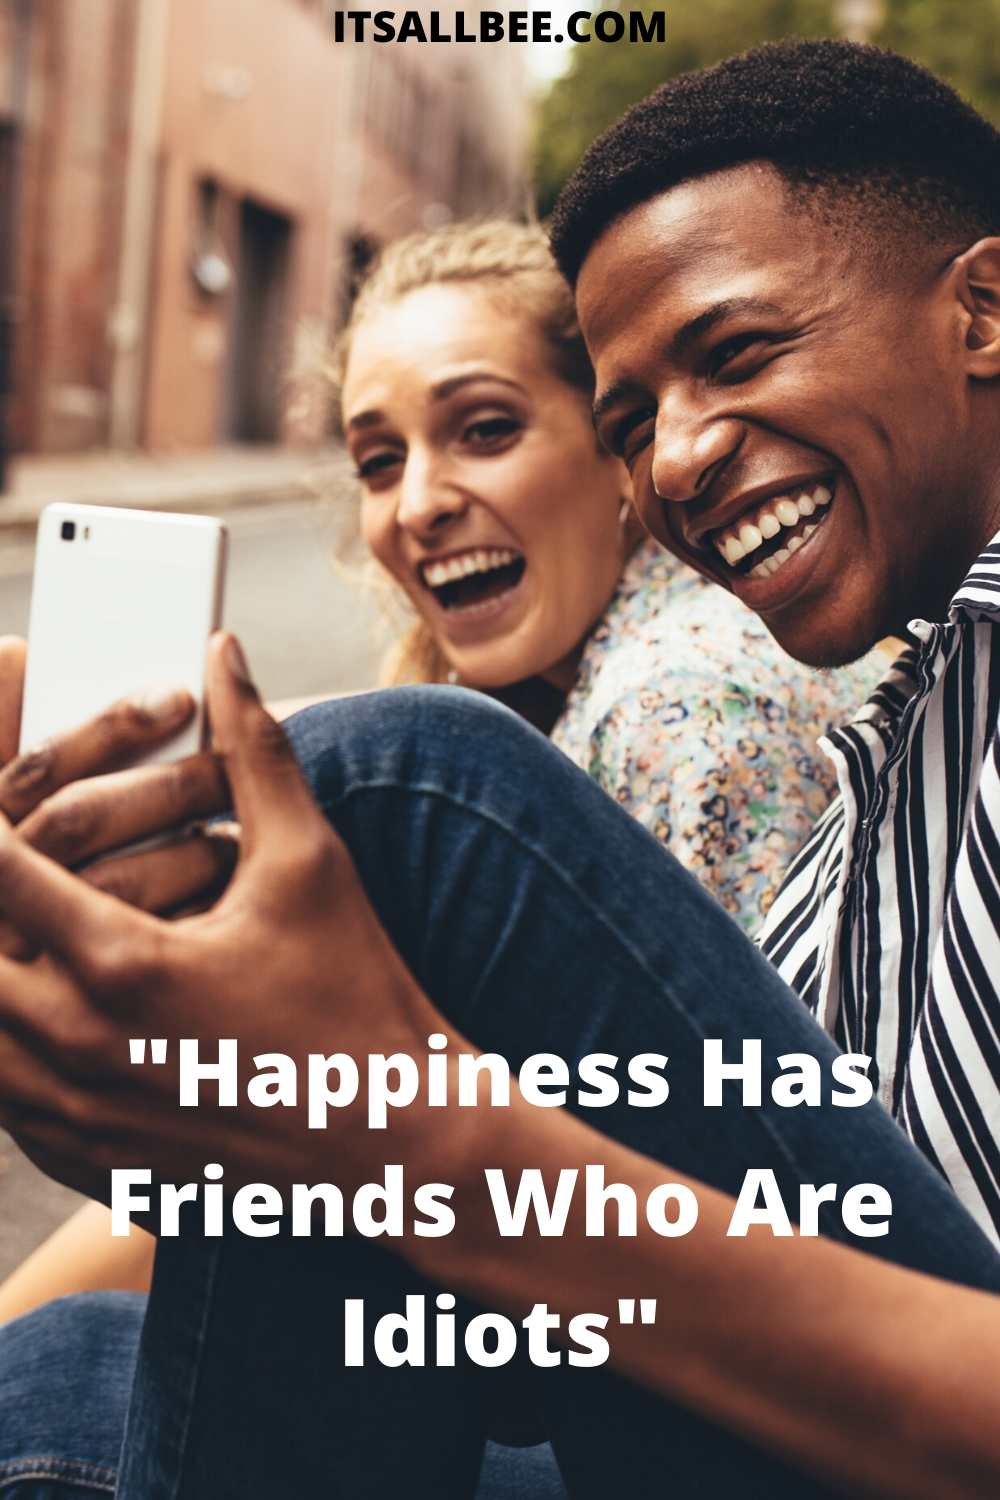 The Best Instagram Captions For Pictures With Friends - ItsAllBee | Solo  Travel & Adventure Tips